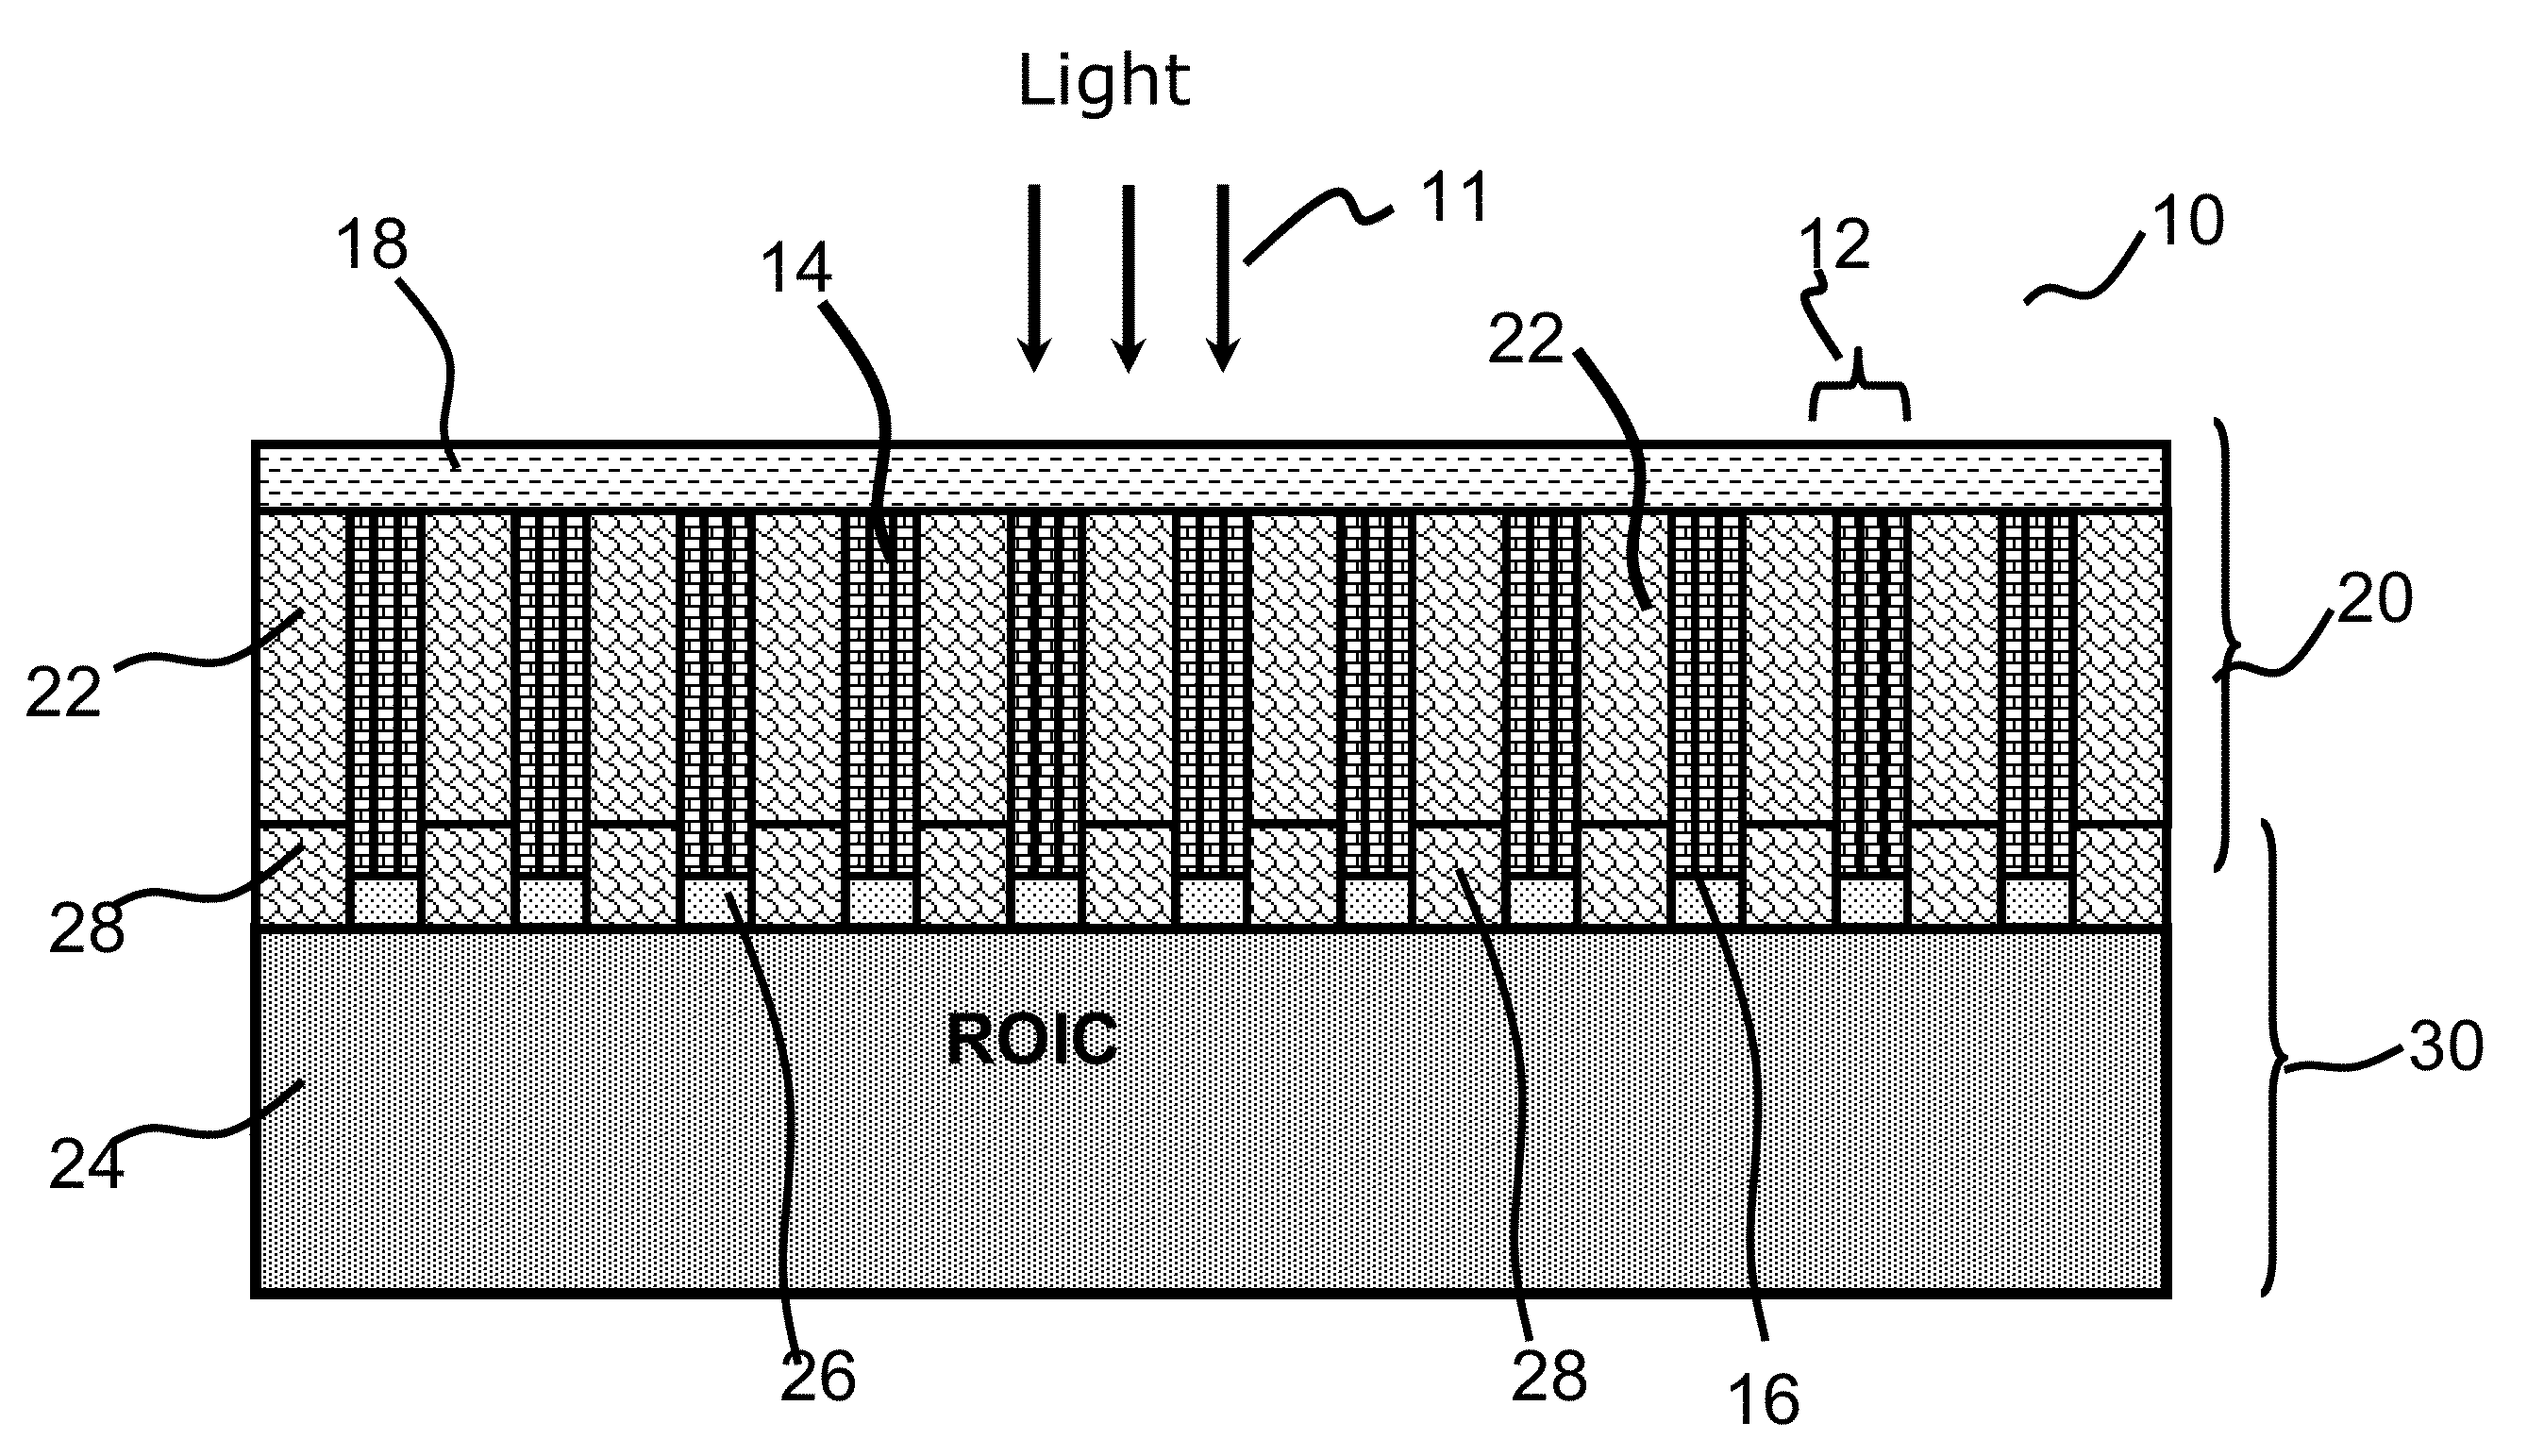 Broadband imaging device and manufacturing thereof